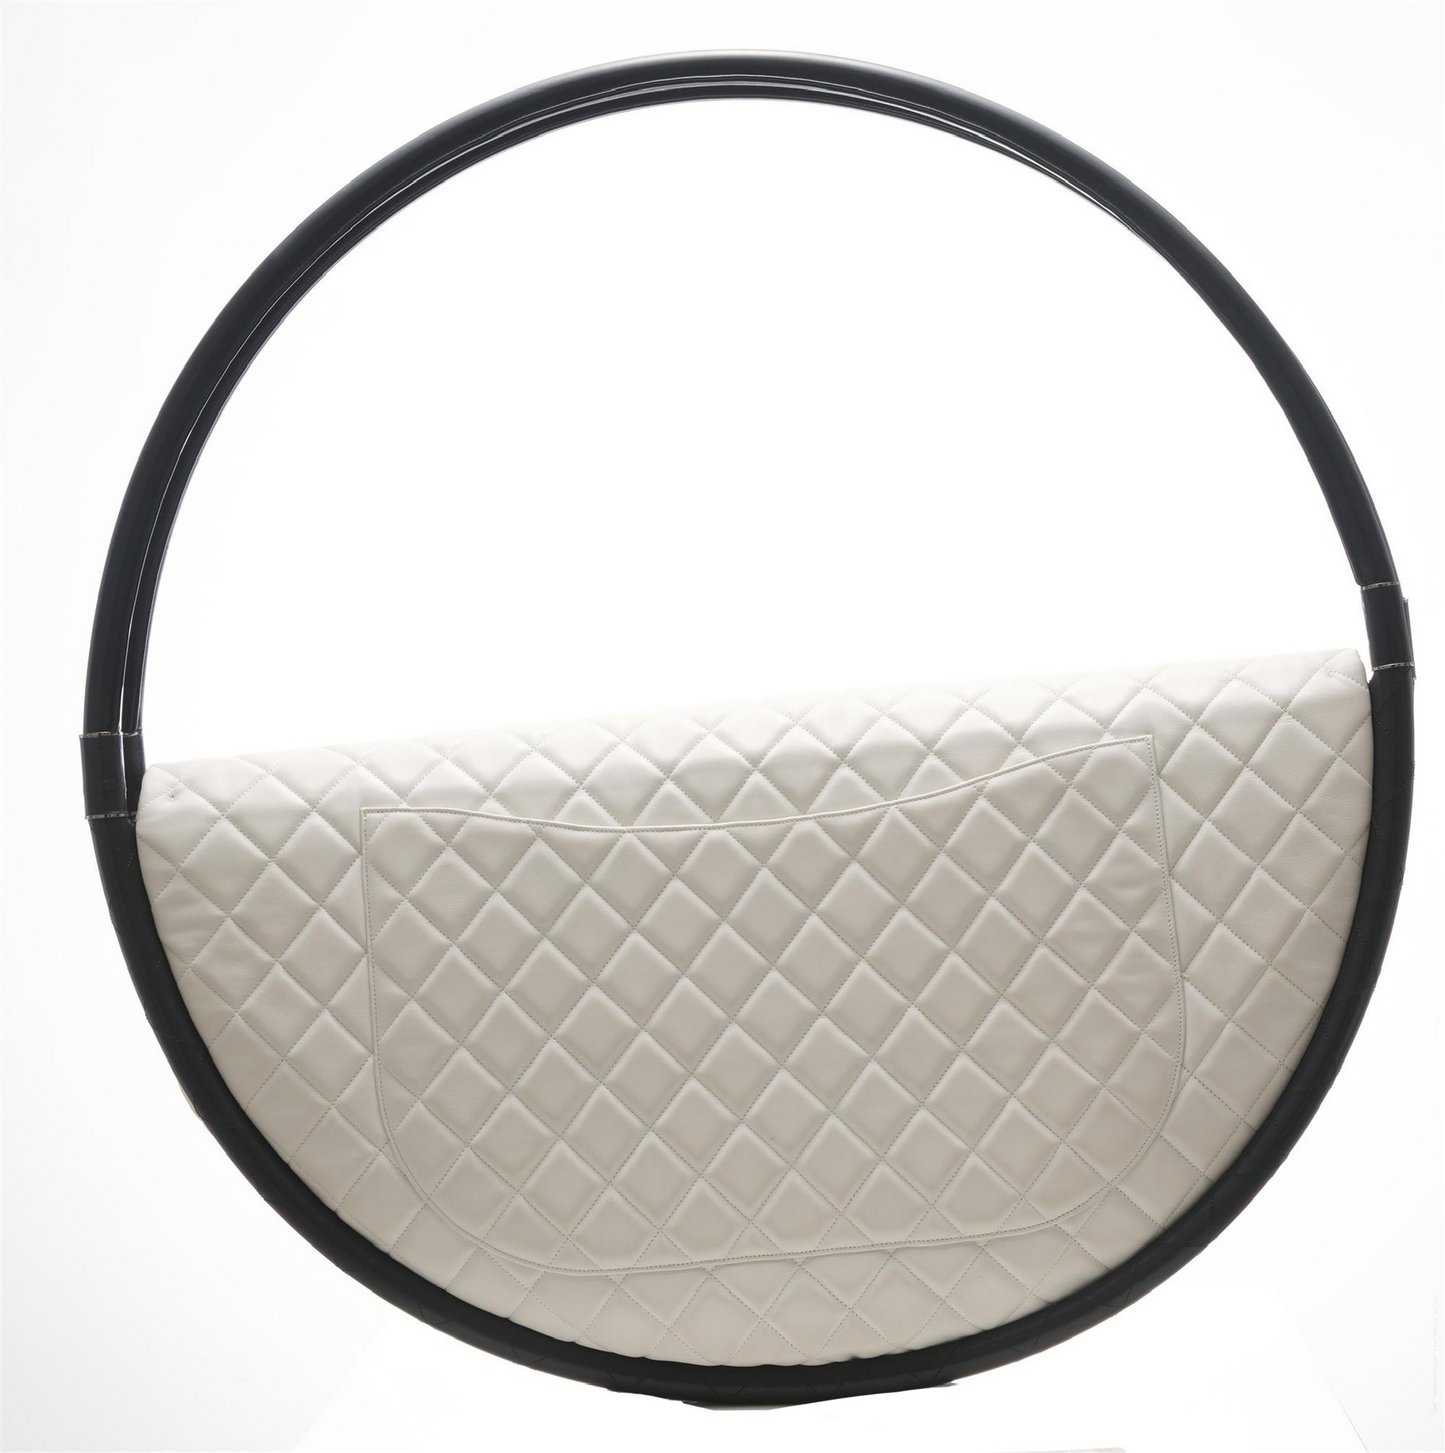 Chanel Lambskin Quilted Hula Hoop in White SHW